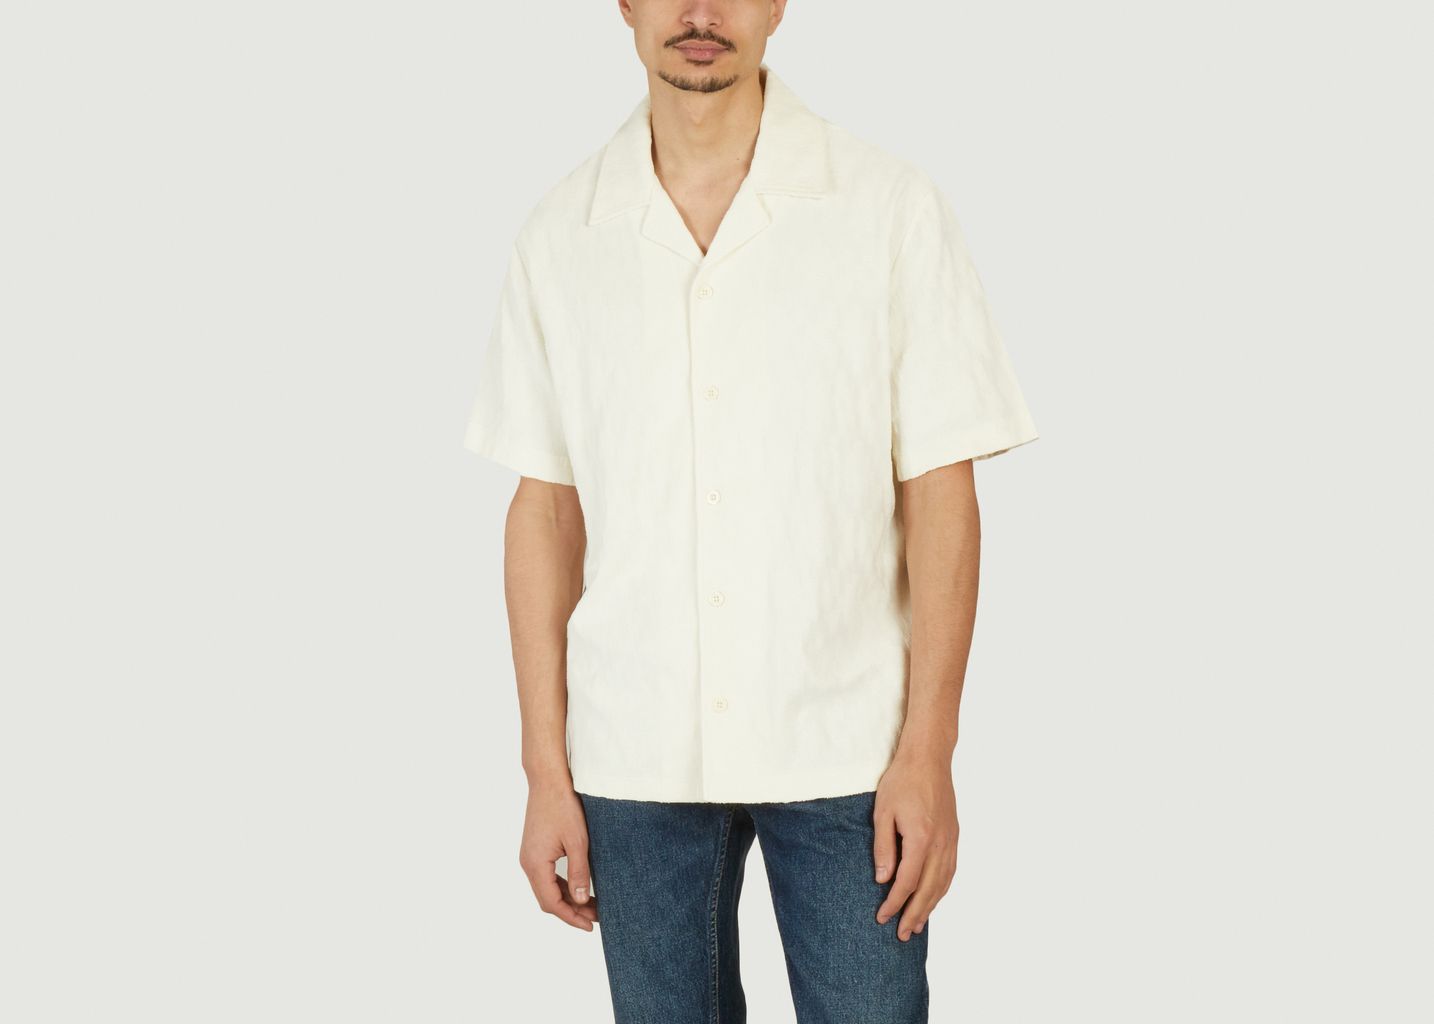 Relaxed fit textured jacquard blouse - Gant